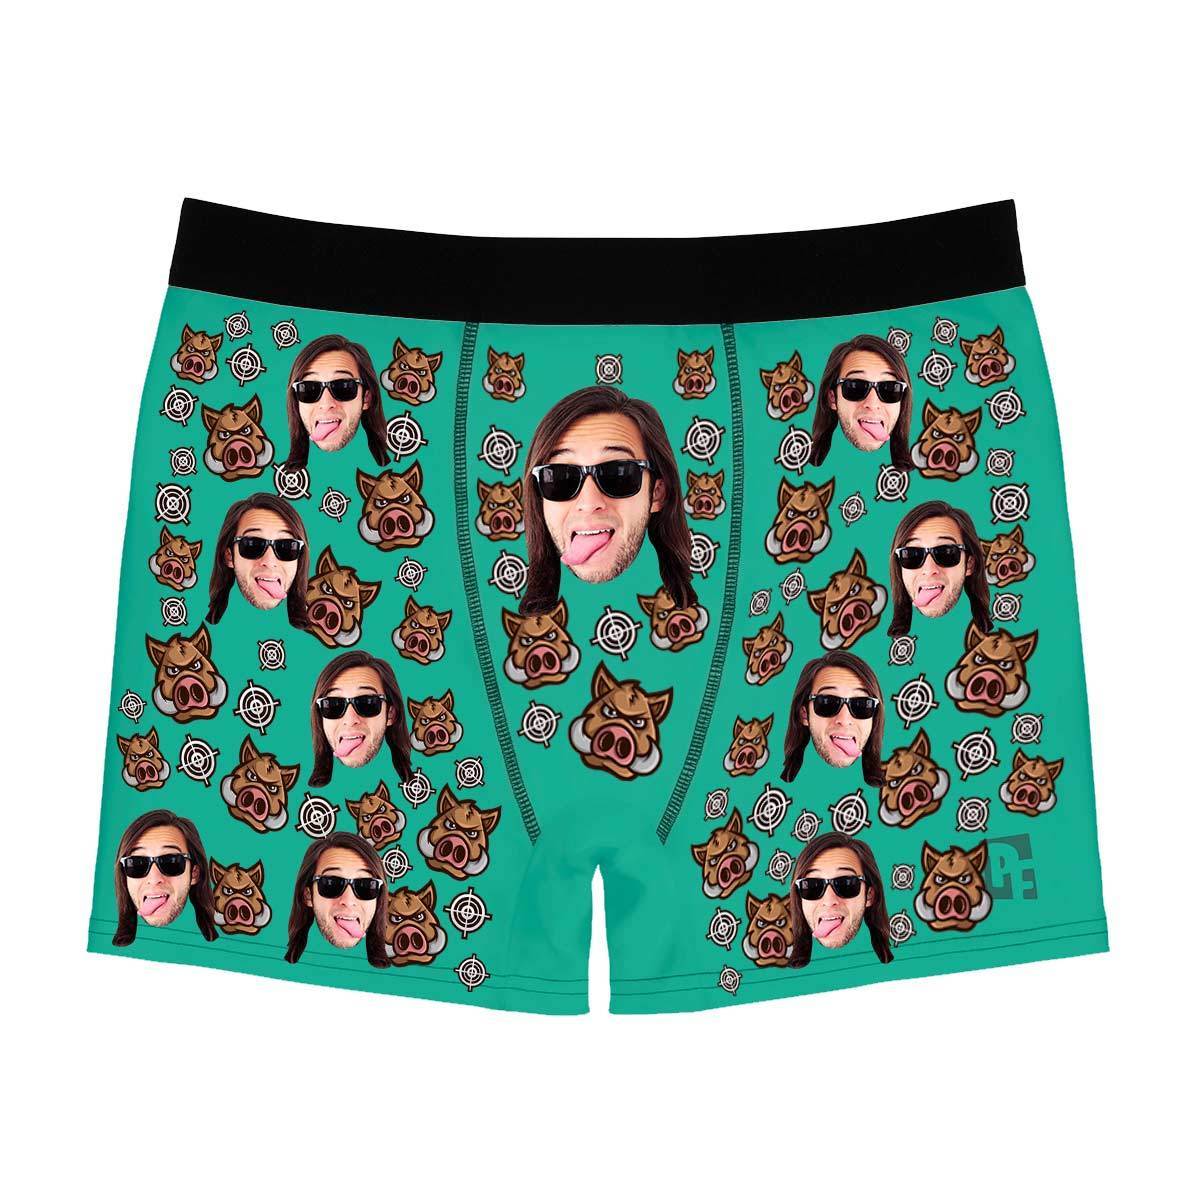 Mint Boar Hunter men's boxer briefs personalized with photo printed on them